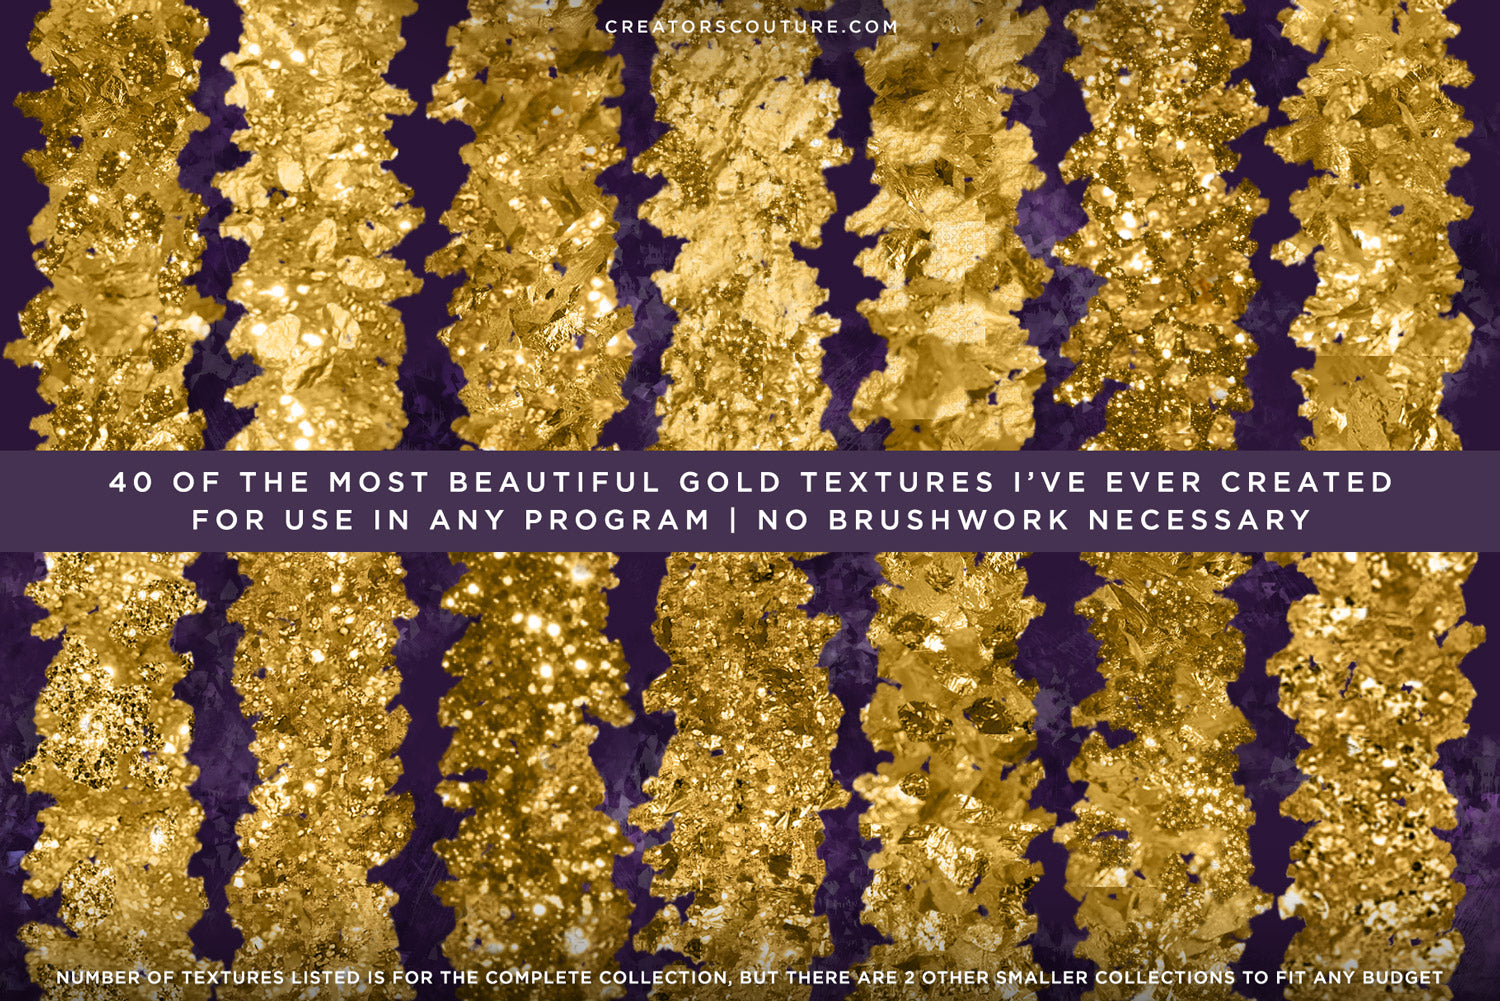 raw gold textures for procreate and photoshop, inspired by gold nuggets and rough gold textures